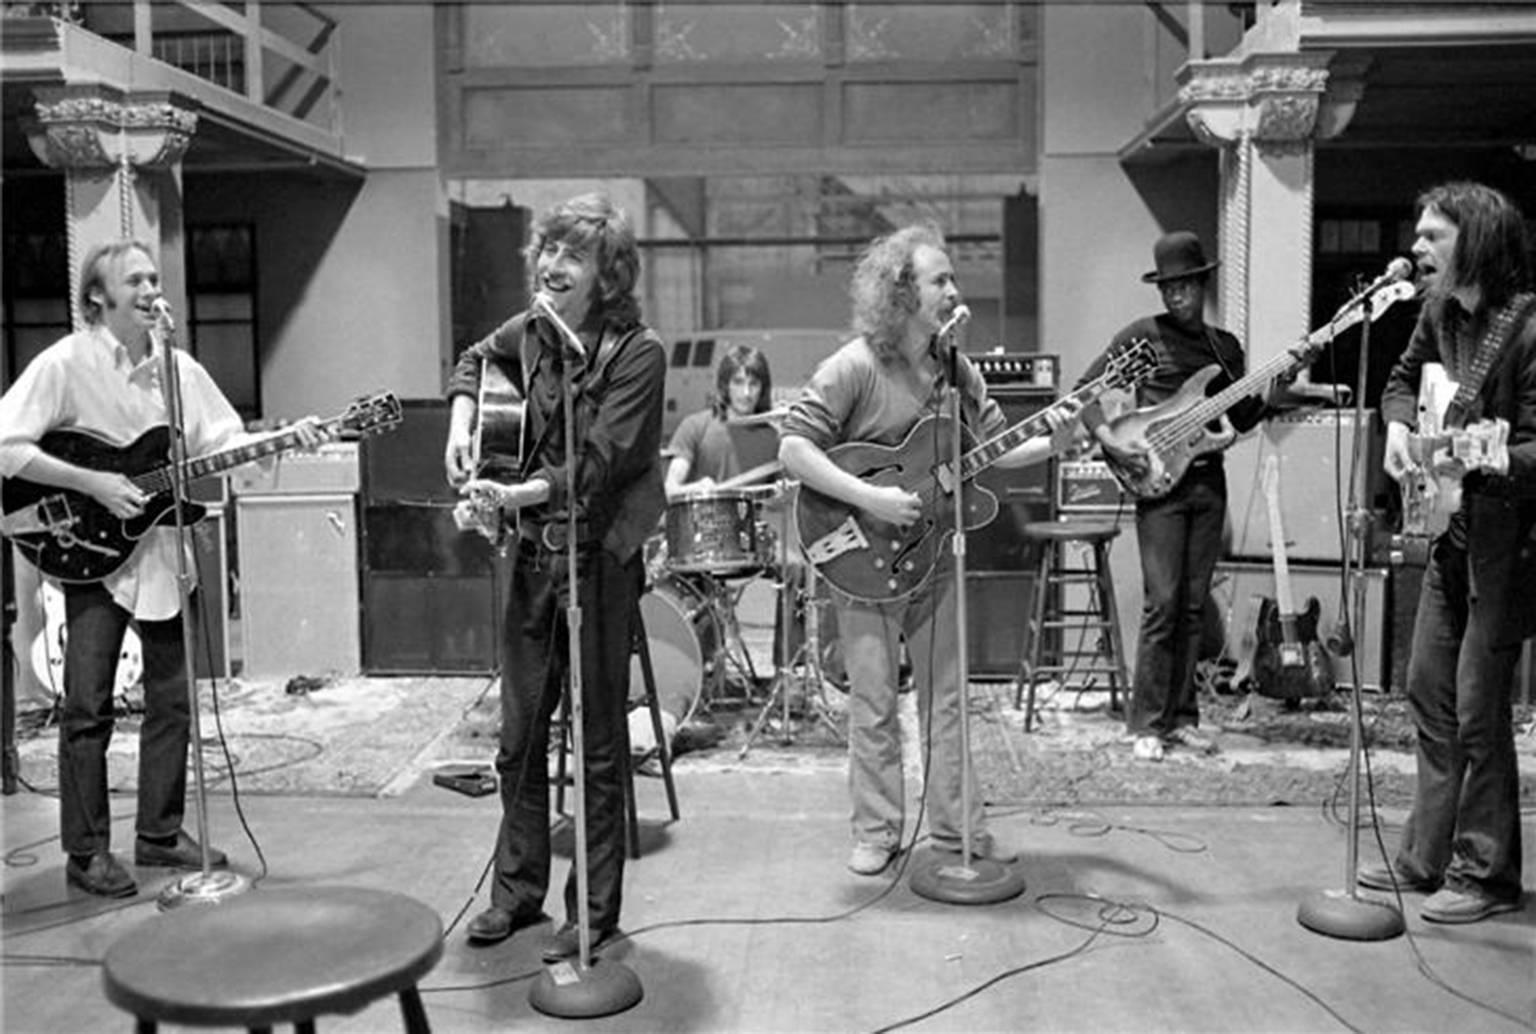 Henry Diltz Portrait Print - Crosby, Stills, Nash, and Young Rehearsal, 1970